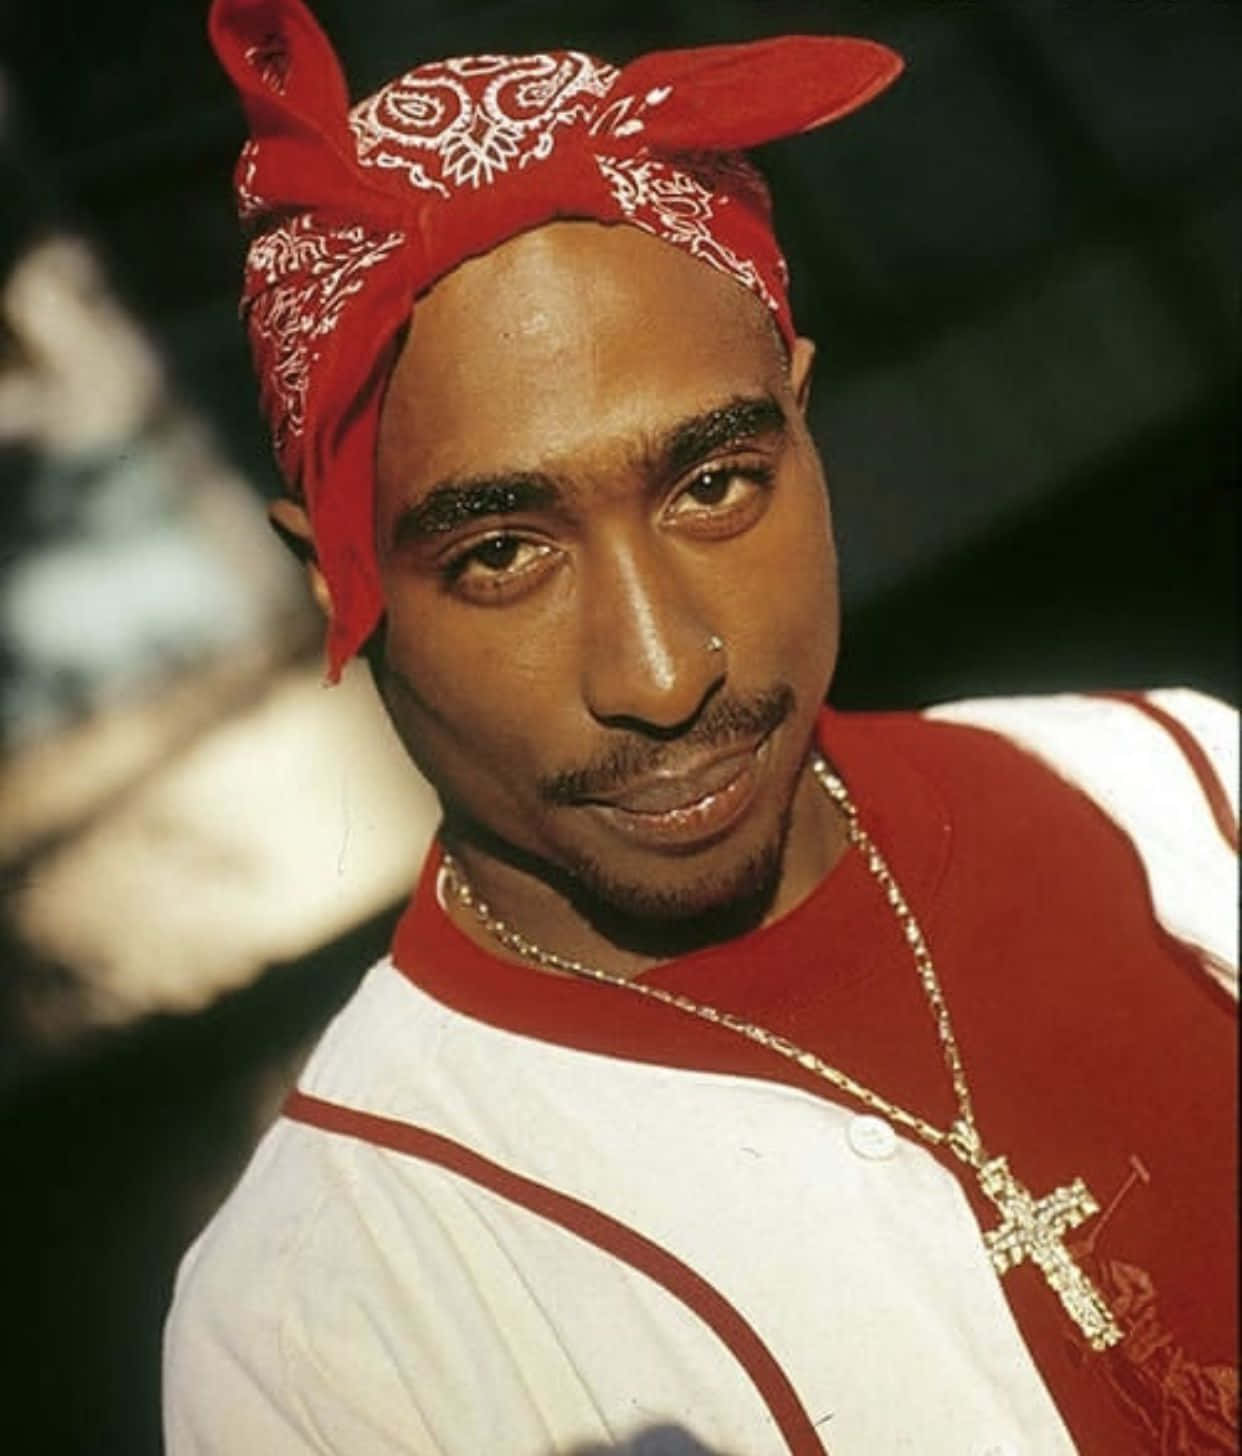 Unstoppable - The Legacy of Tupac Shakur